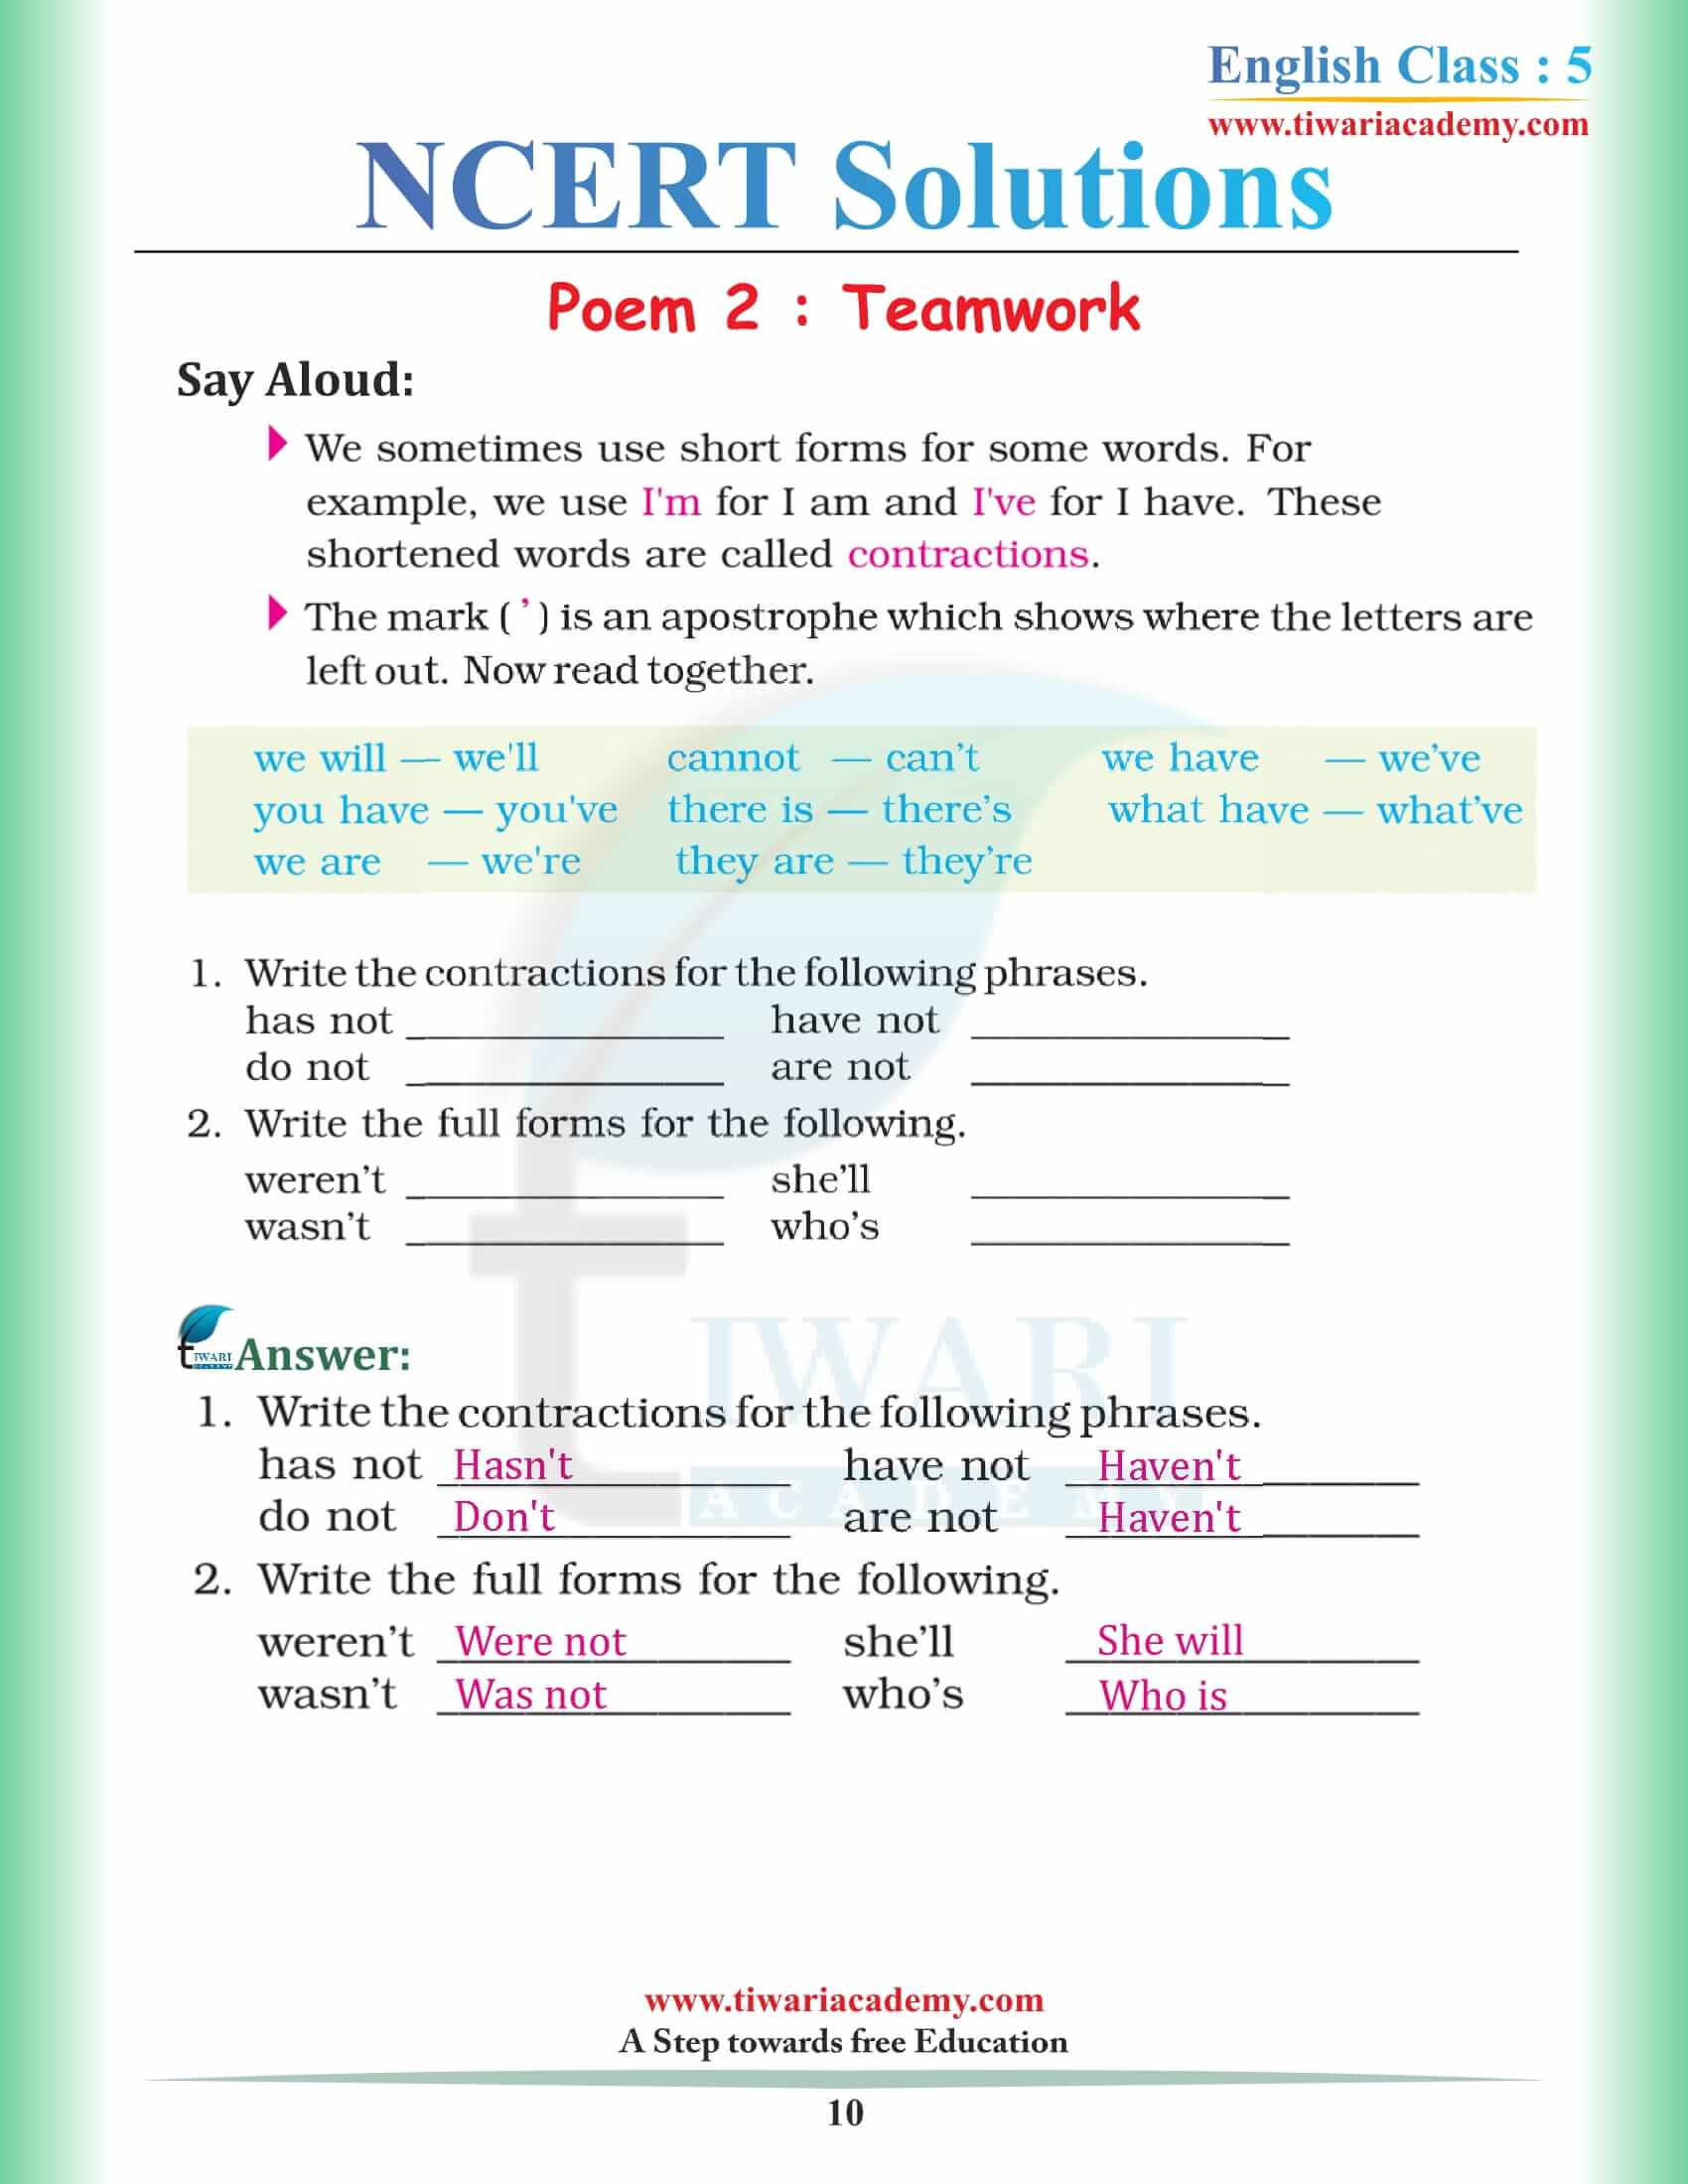 NCERT Solutions for Class 5 English Chapter 2